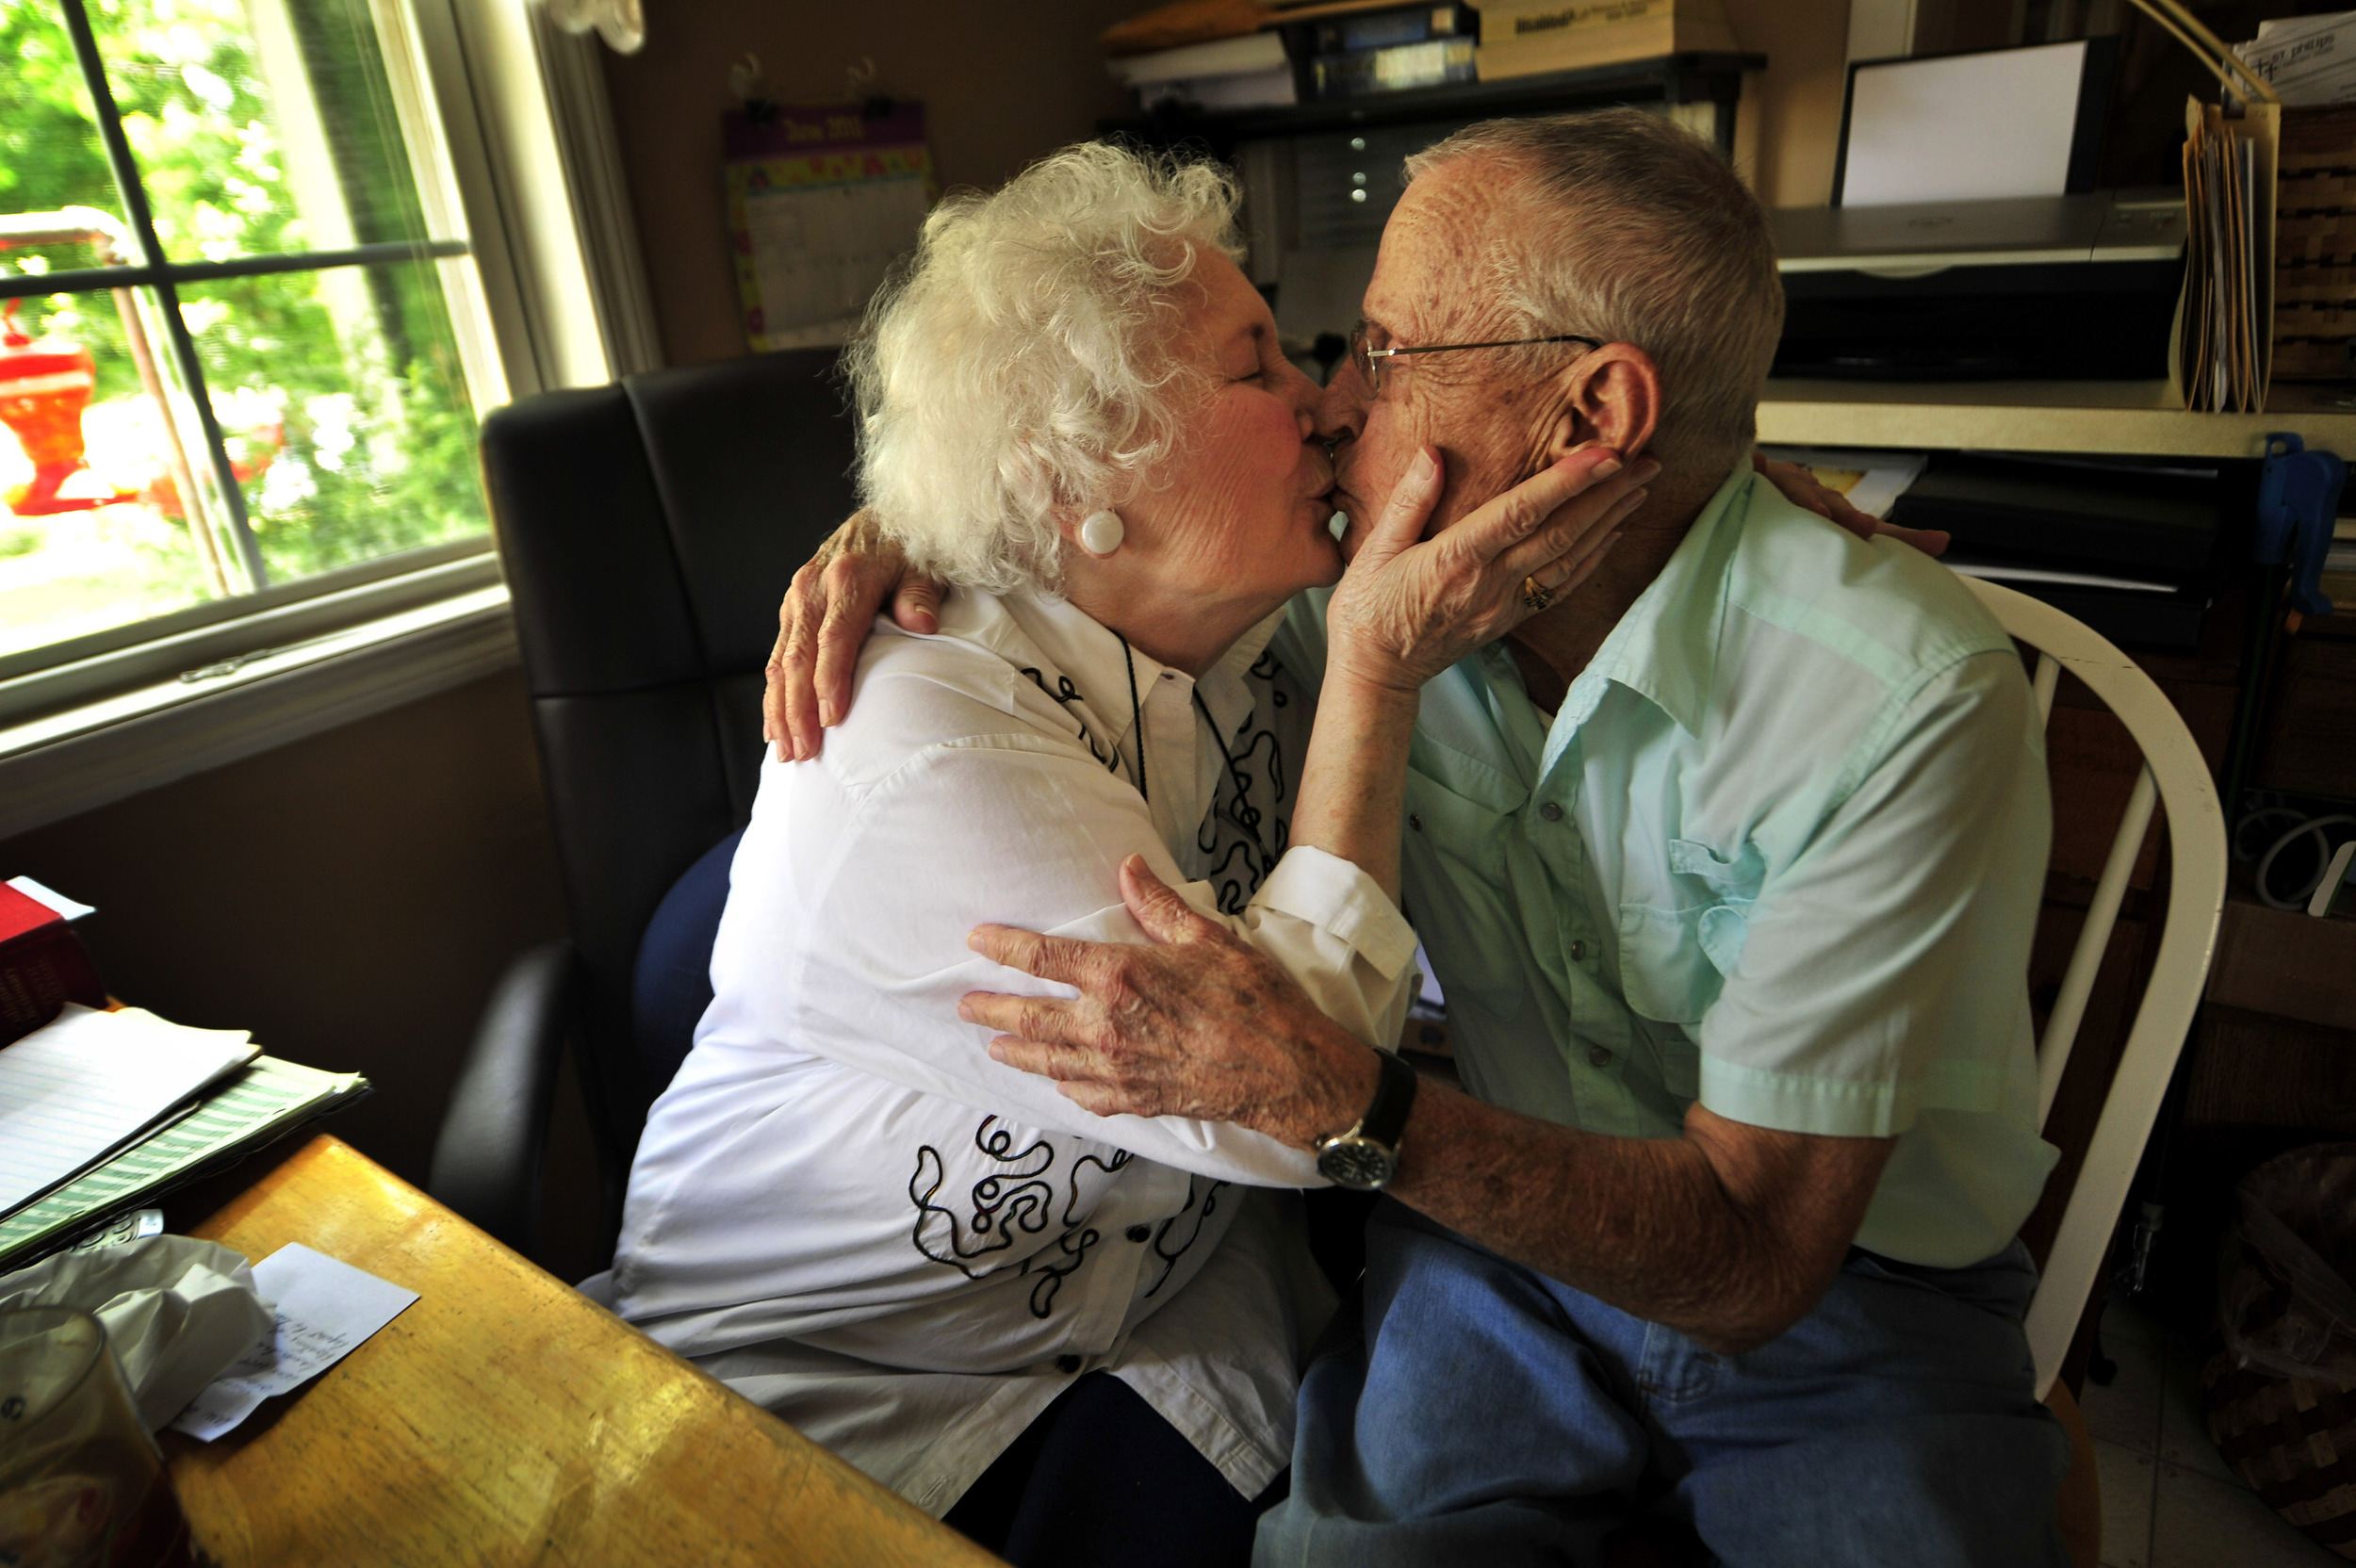  Clara Emery Pugh, 83, and Marvin Pugh, 85, went to high school together in the 40's but reconnected later in life and married in 2001 June 16, 2011 in Nashville, Tenn. 